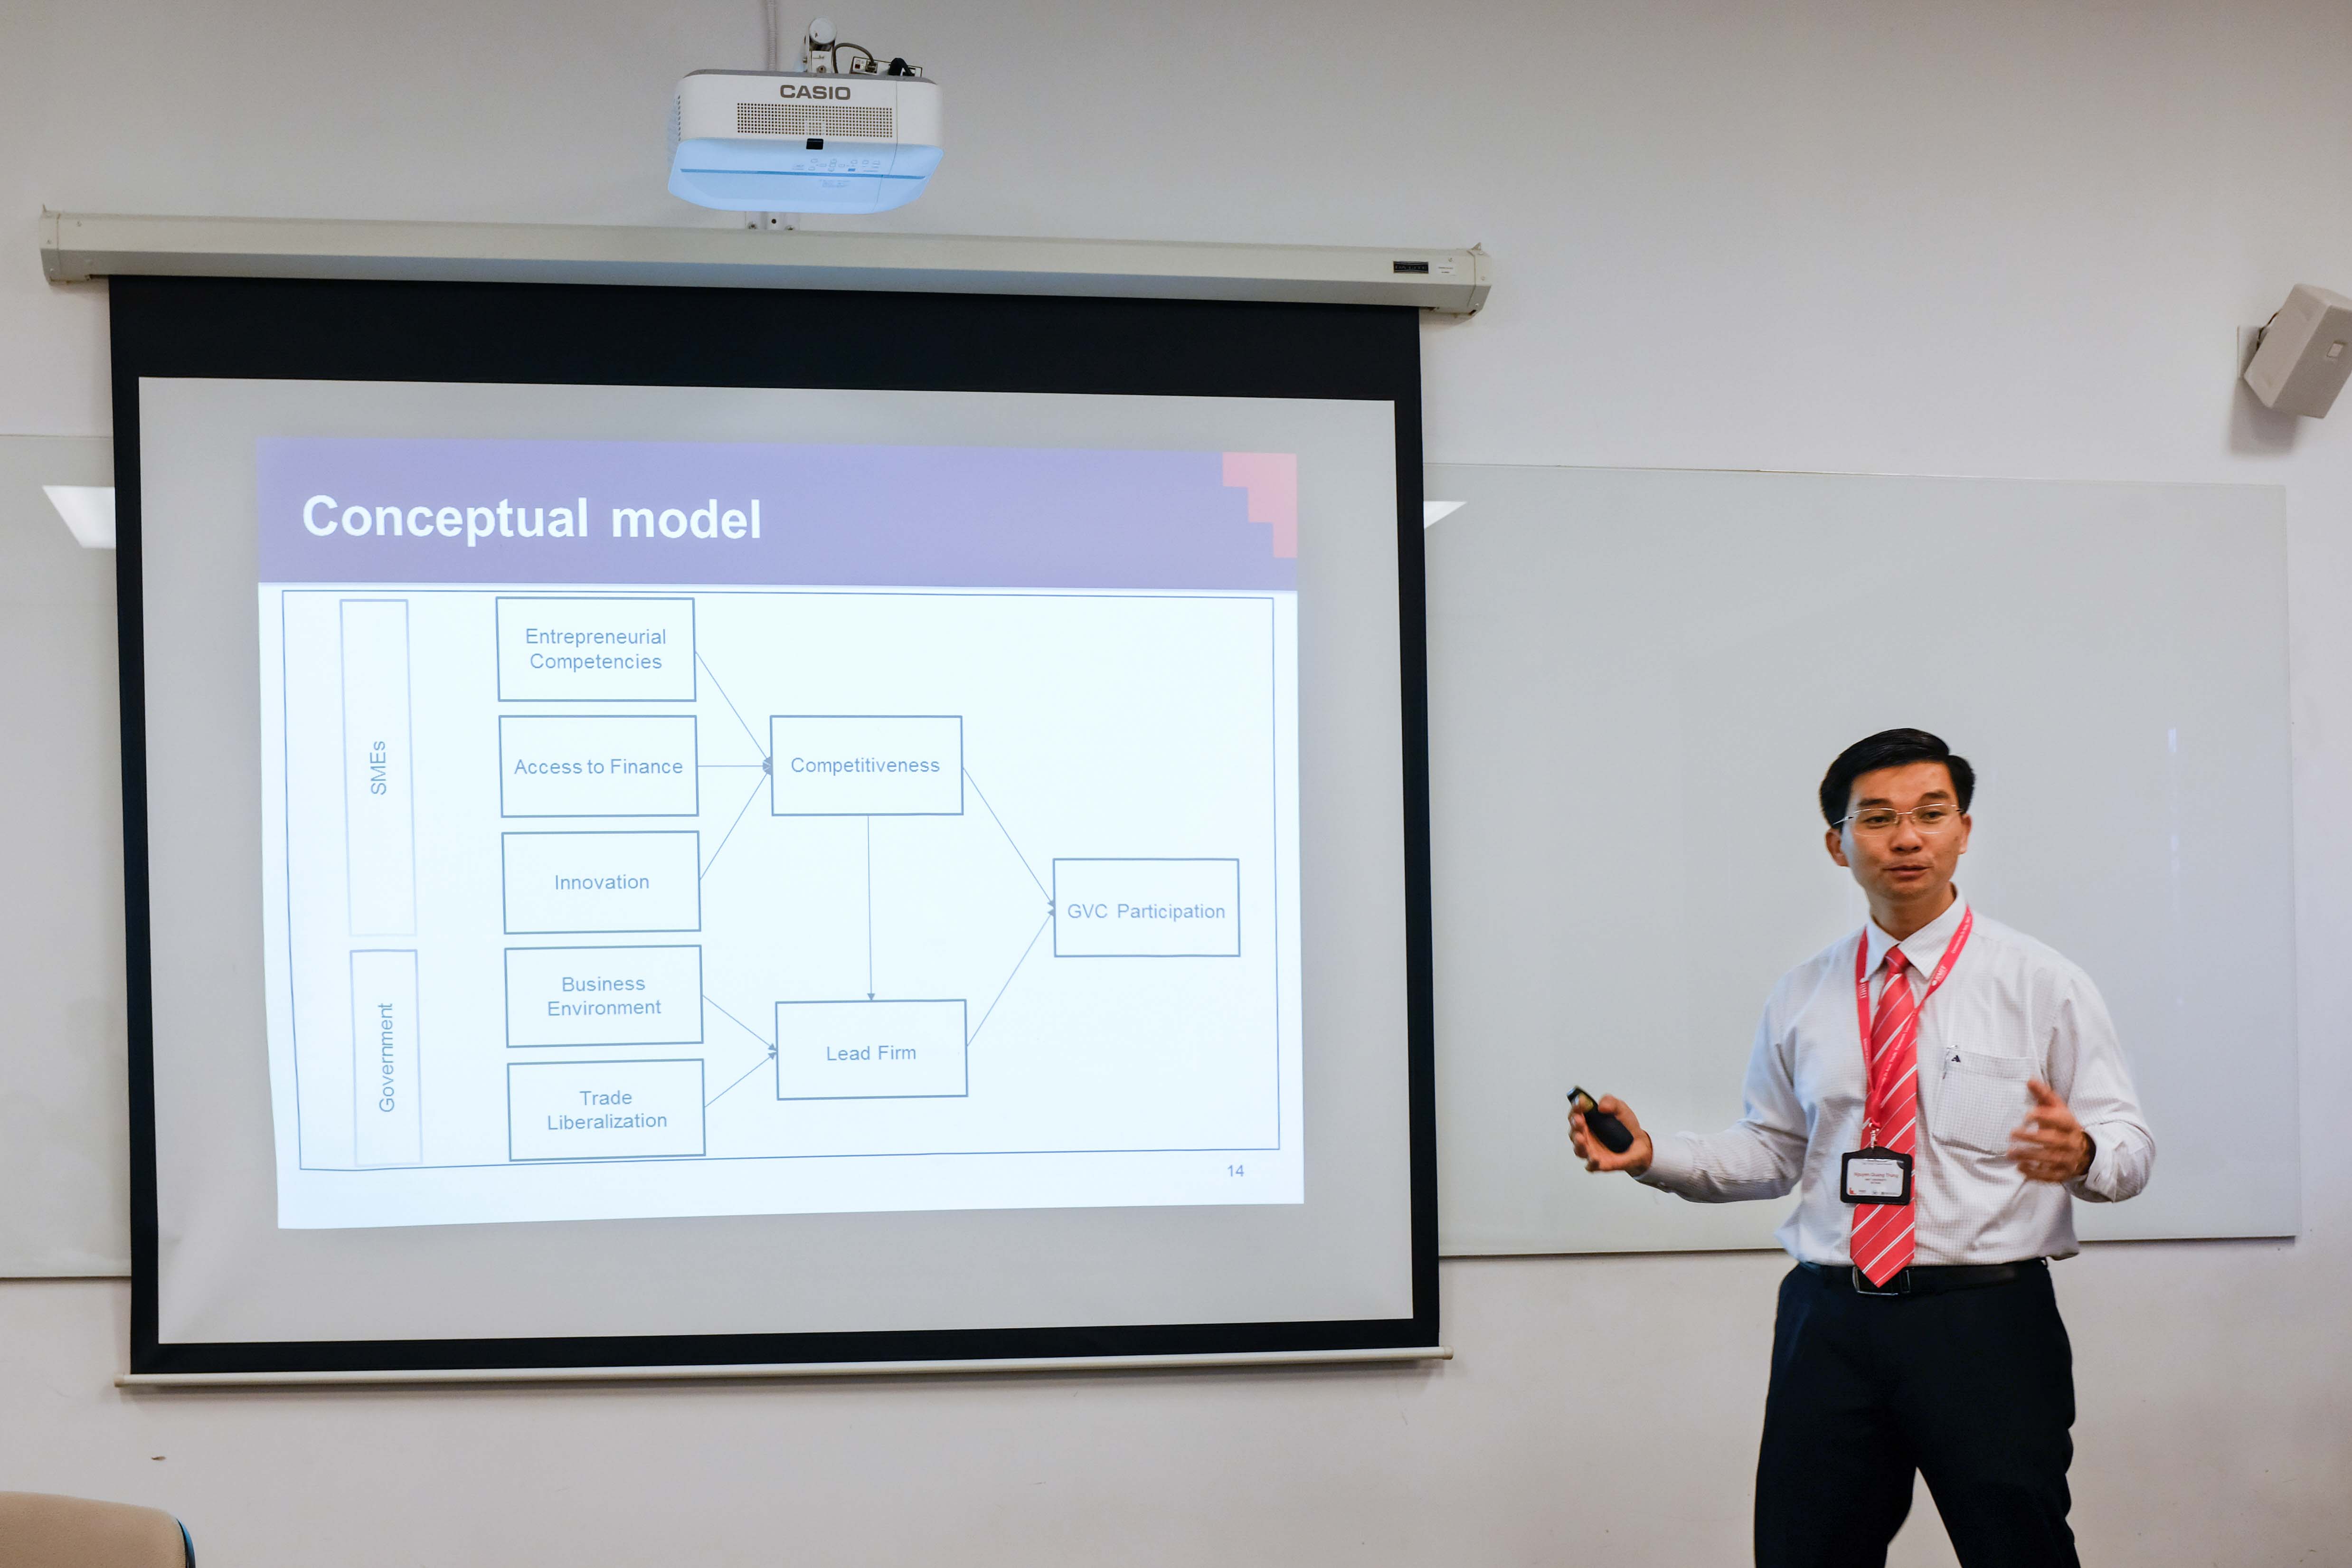 Dr Nguyen Quang Trung, Discipline Lead for the International Business program, presented the paper Determinants for Participation in the Global Value Chain Challenges and Prospects of Small and Medium Enterprises in Vietnam.